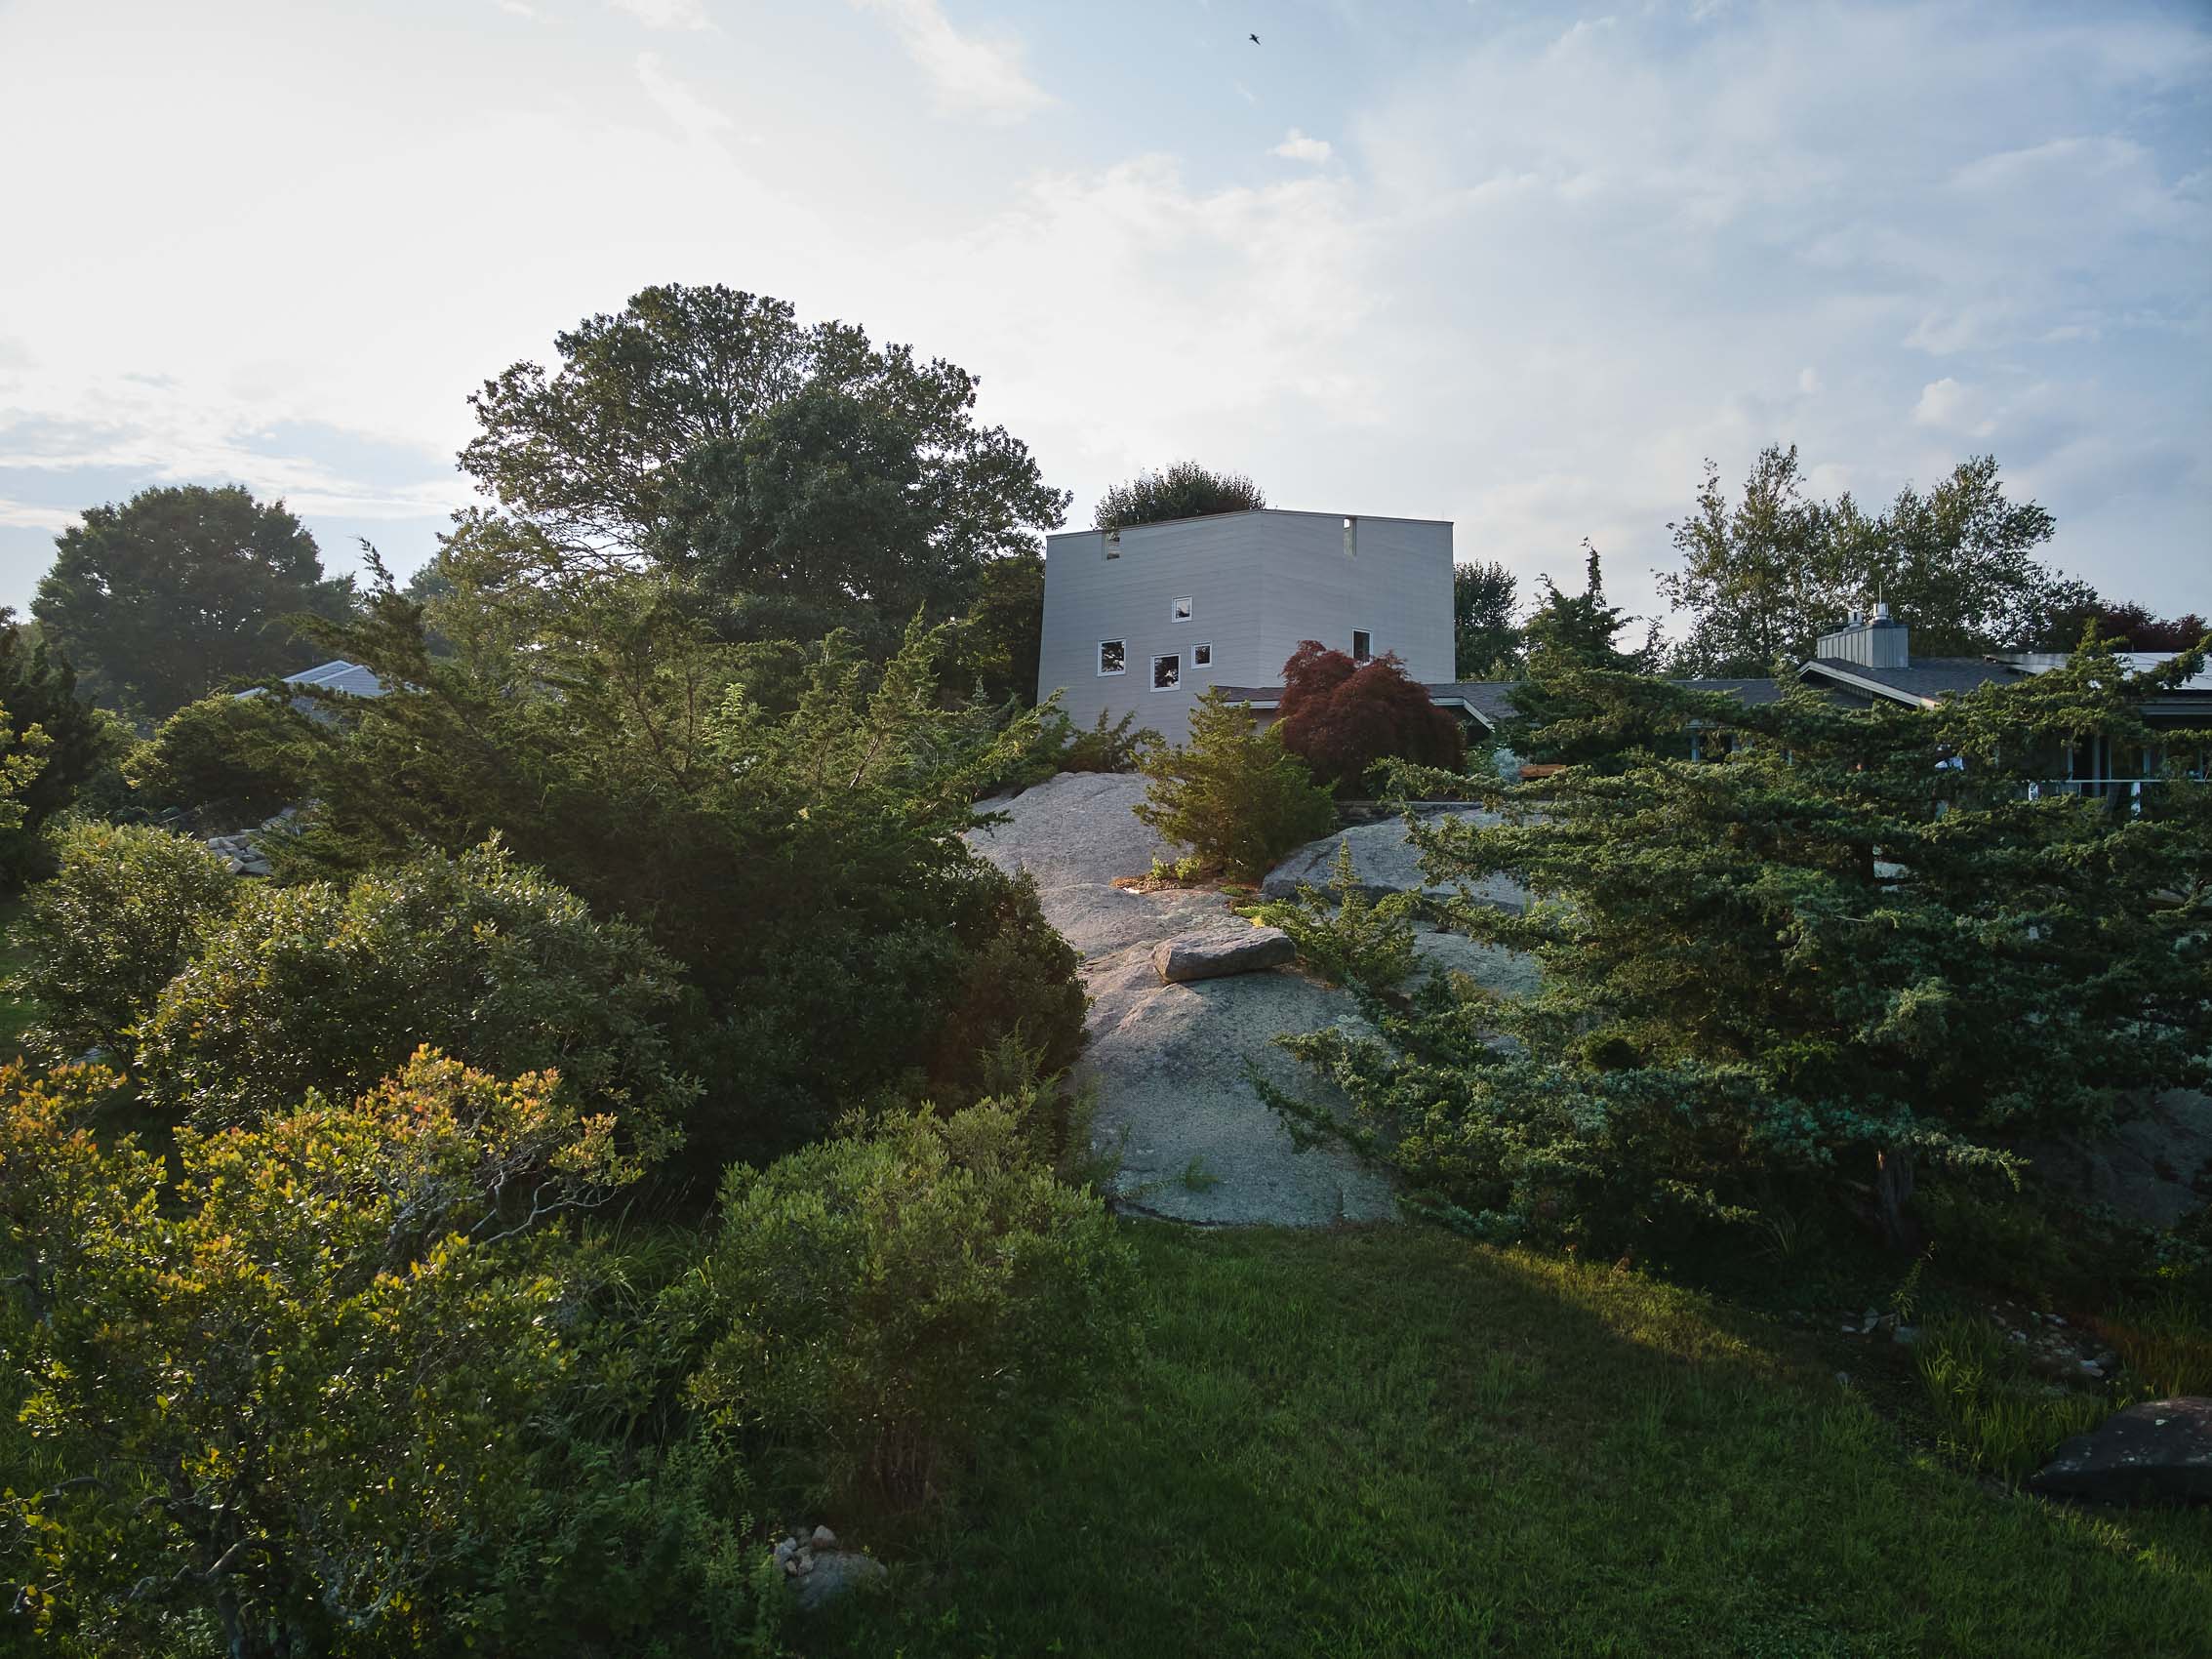 Late afternoon photograph of exterior of modern house set in  rocky terrain and trees